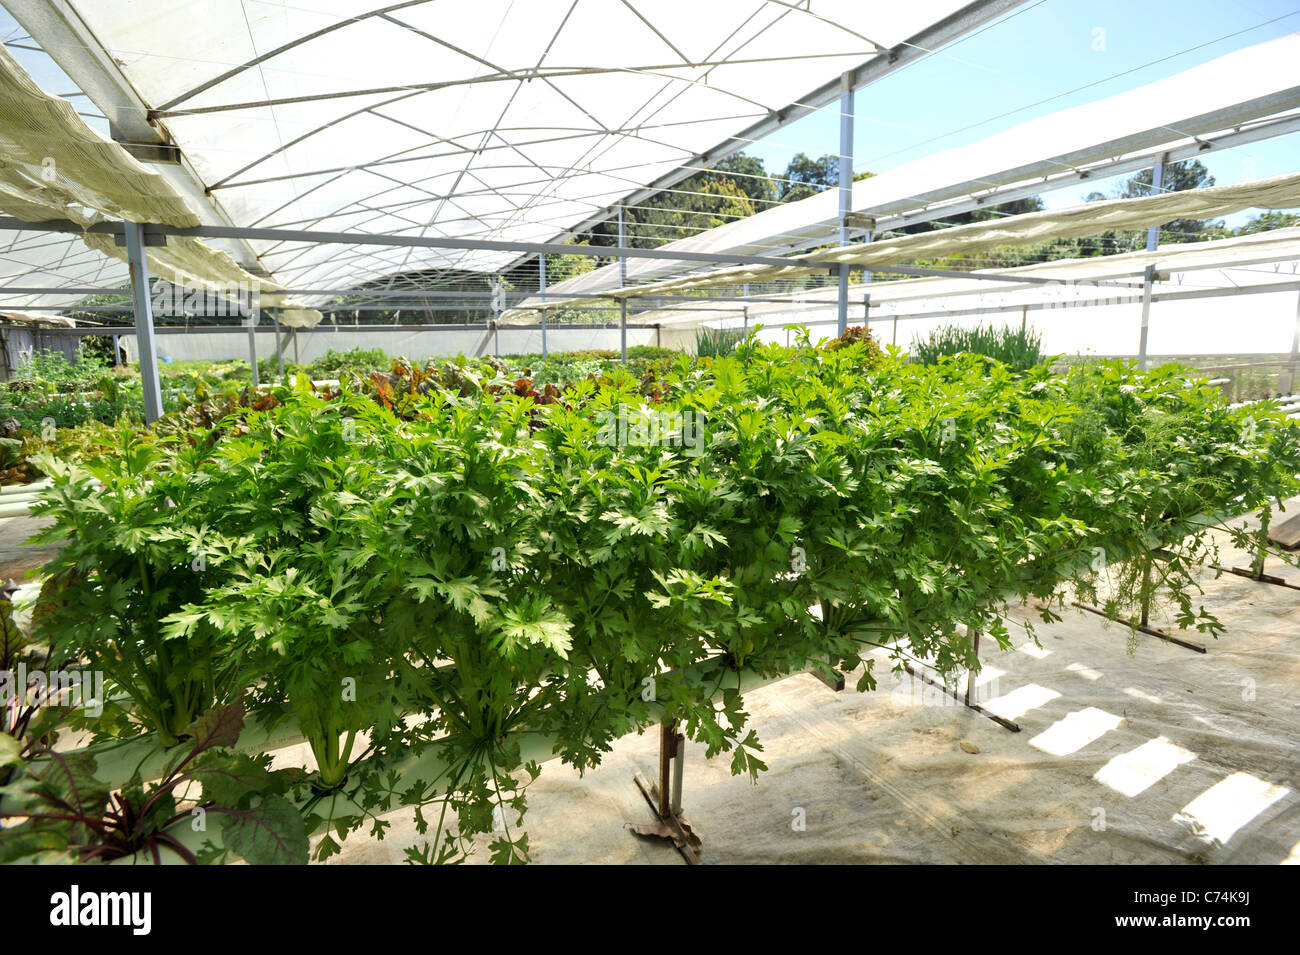 A Hydroponic Garden producing leafy green vegetables in the Currumbin Valley Queensland Australia celery Stock Photo